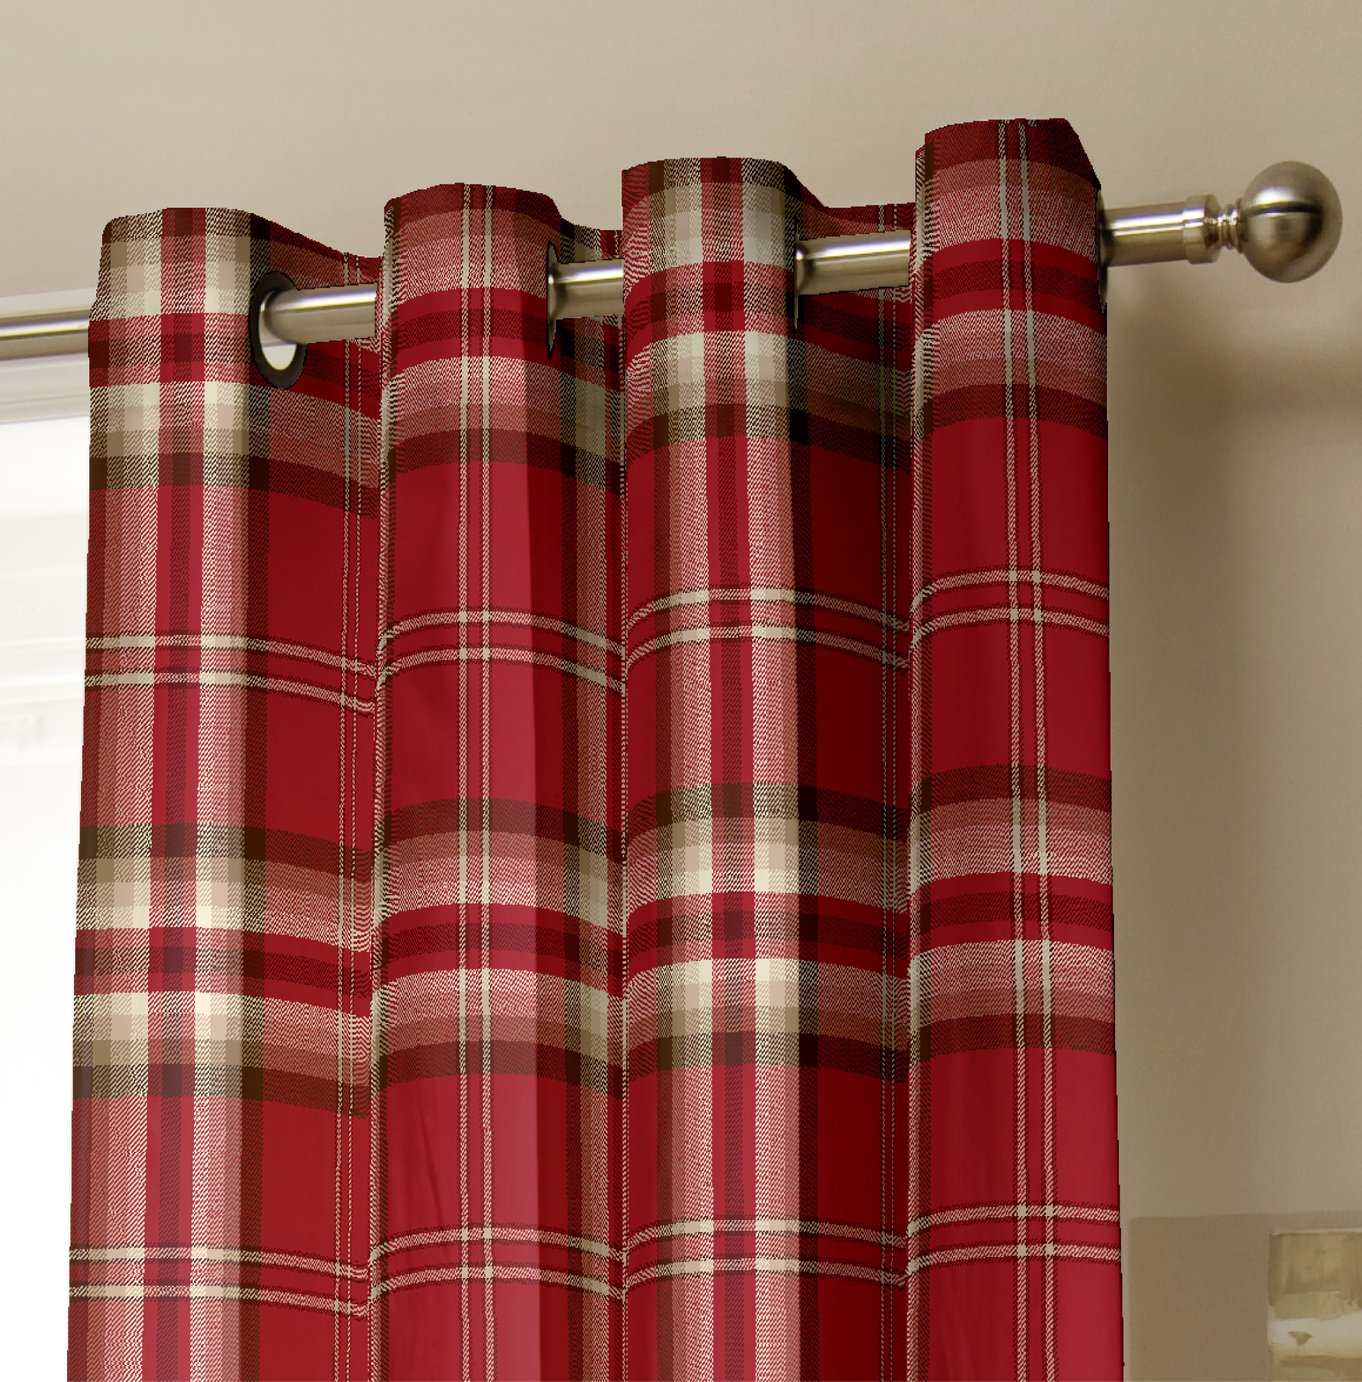 Kelso Pencil Pleat Lined Curtains - 168 x 183cm - Red